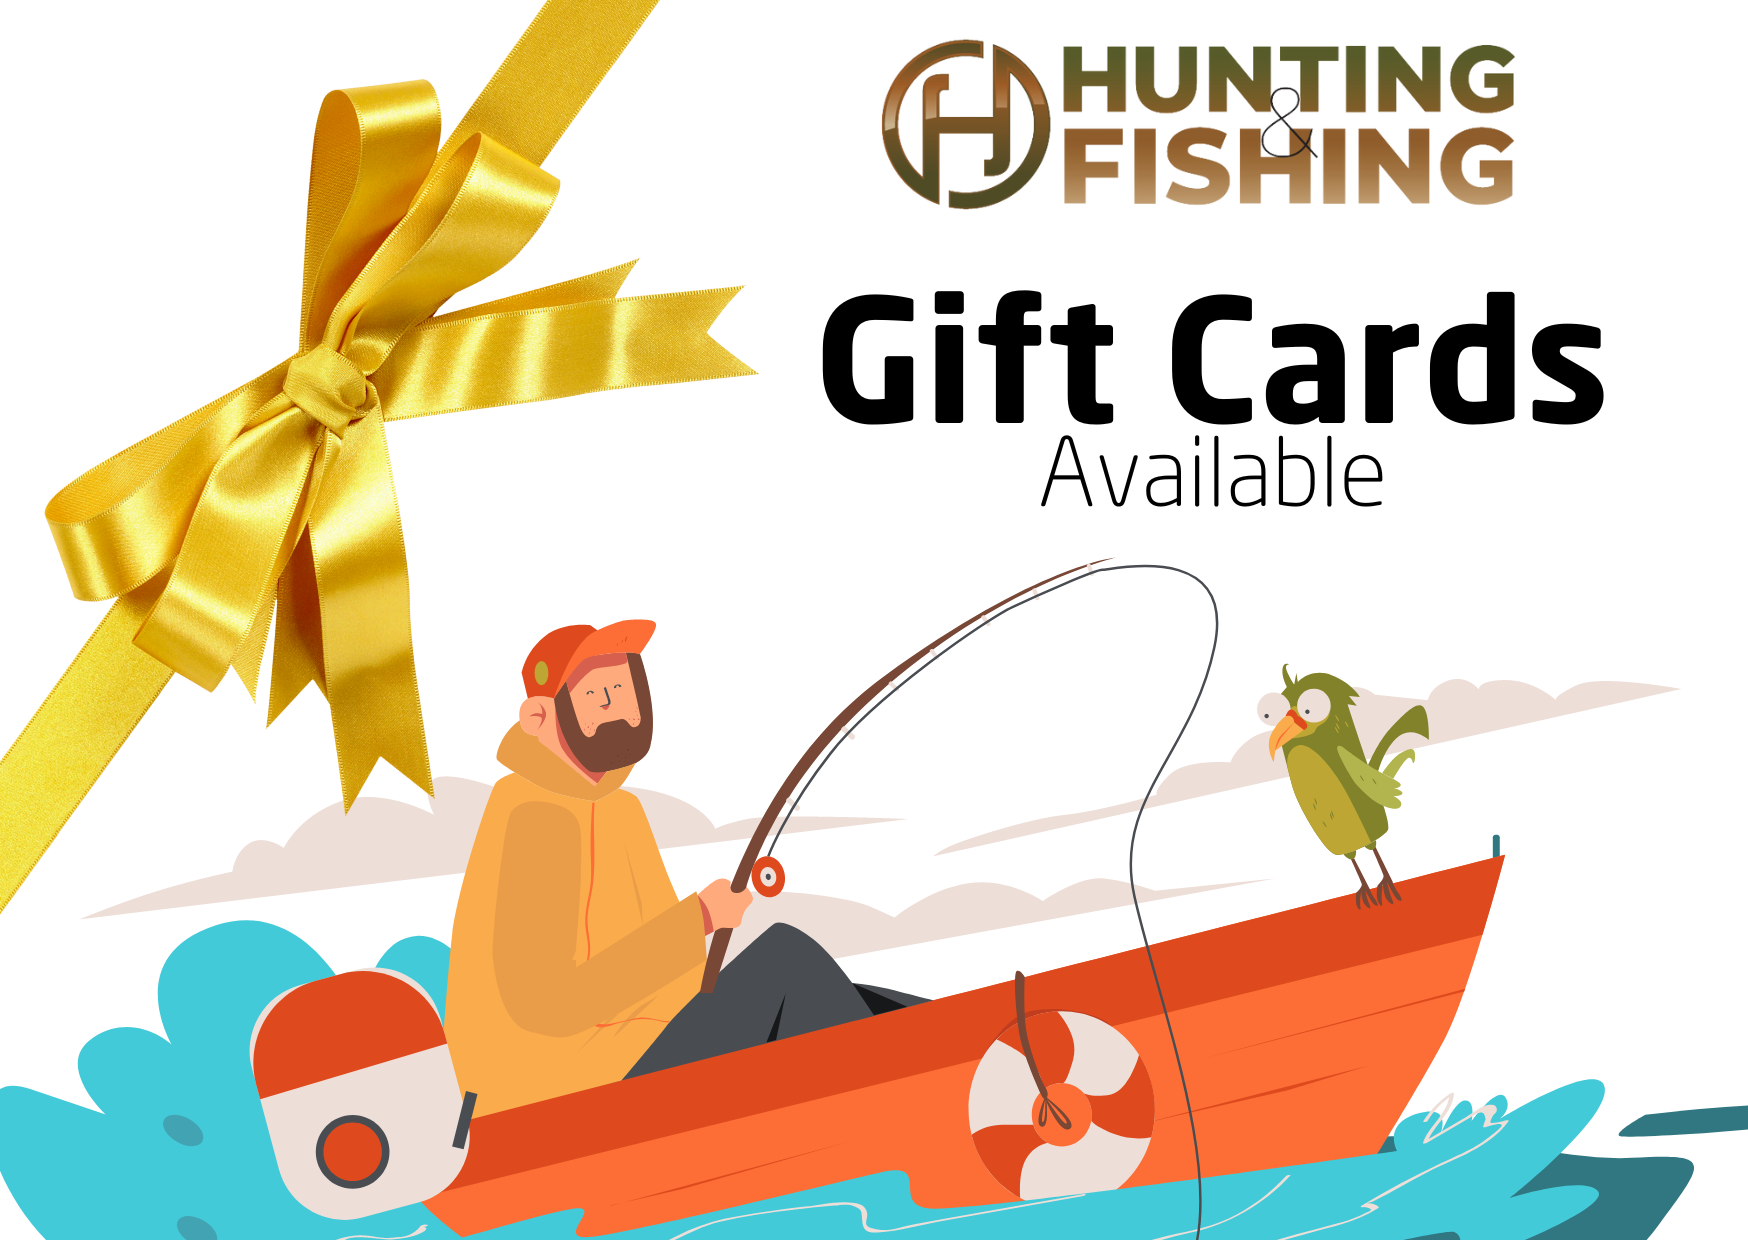 https://www.huntingandfishing.ie/wp-content/uploads/2019/12/Hunting-Fishing-Gift-Cards.-1.png